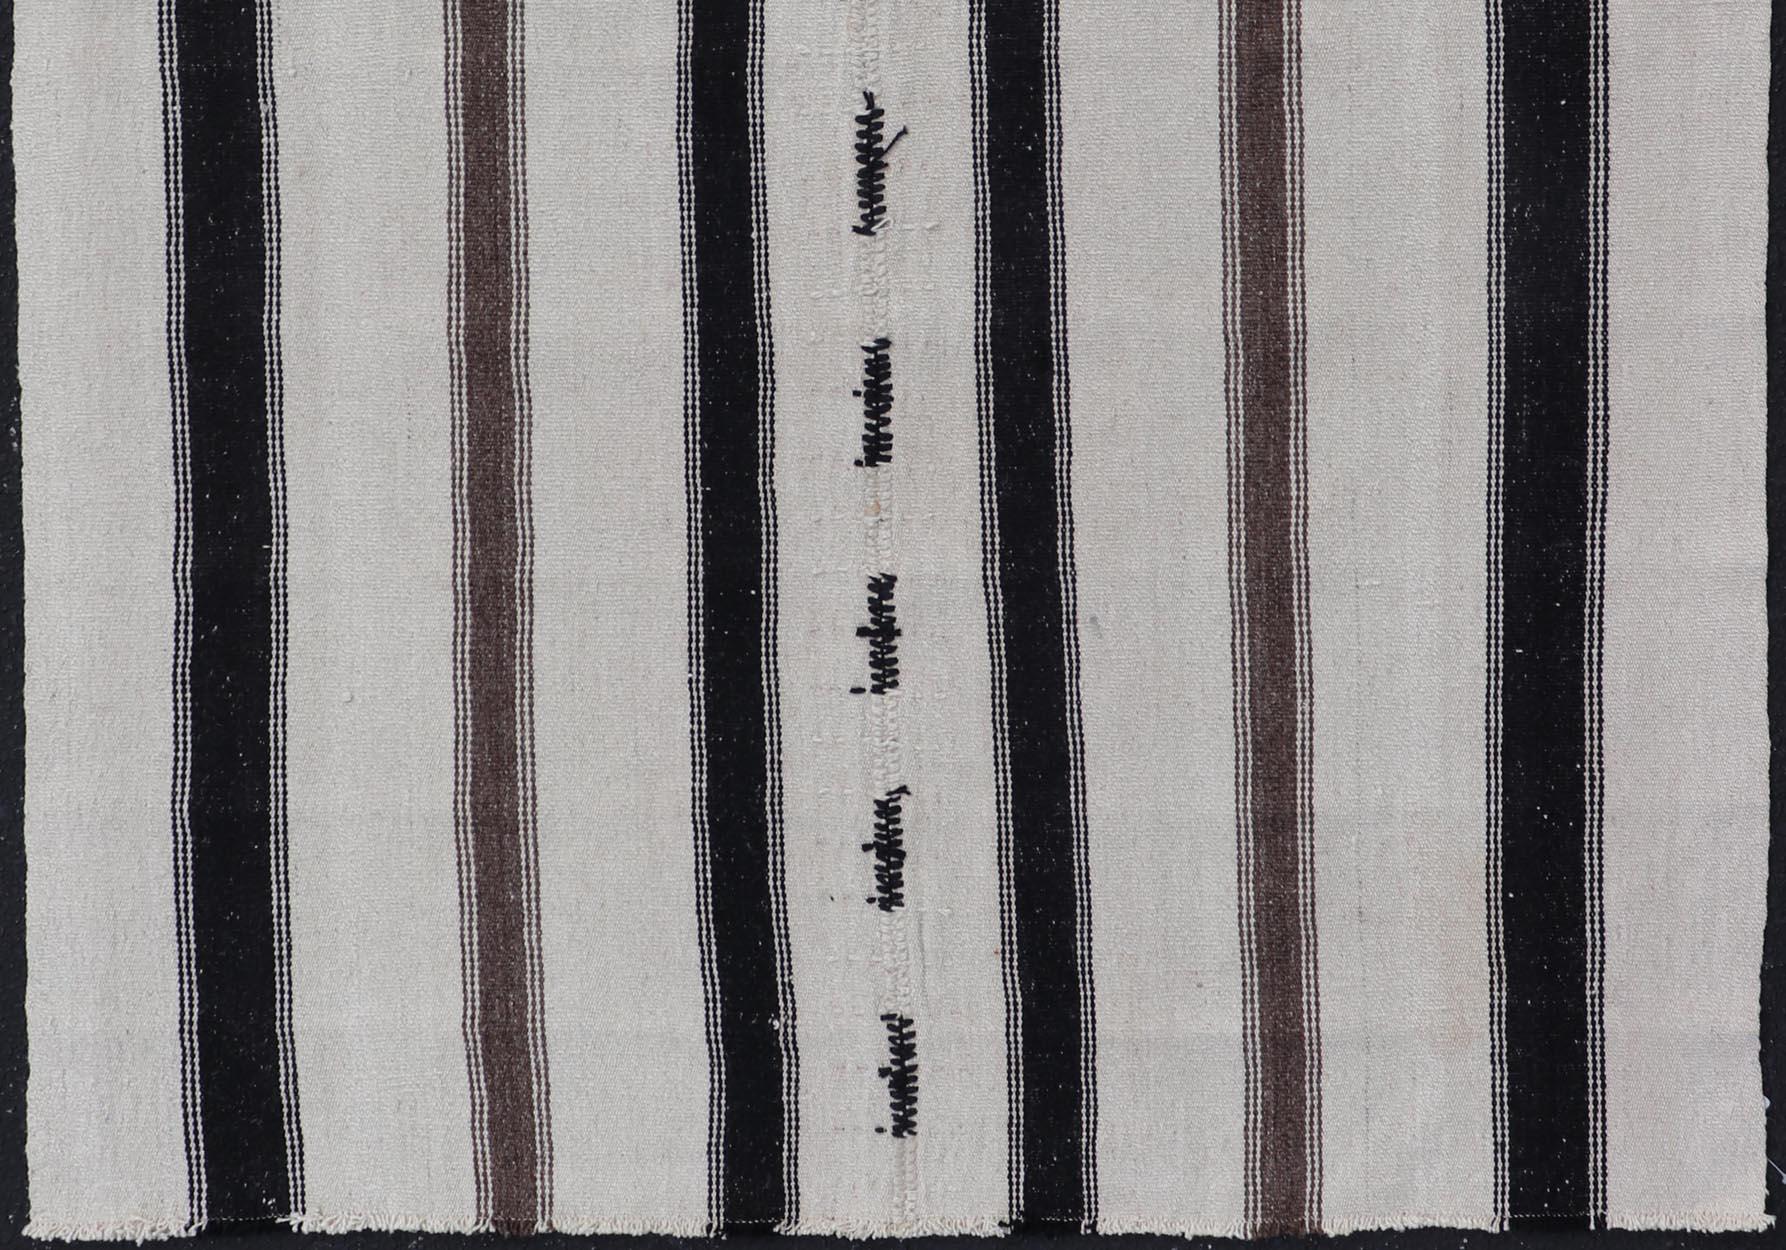 Measures: 4'4 x 6'10 

This vintage Turkish Kilim features simple design and neutral colors, giving these types of rugs a rise in popularity in modern interiors of the 2020's. The paneled stripes feature ebony, cream, and browns, in a very minimal